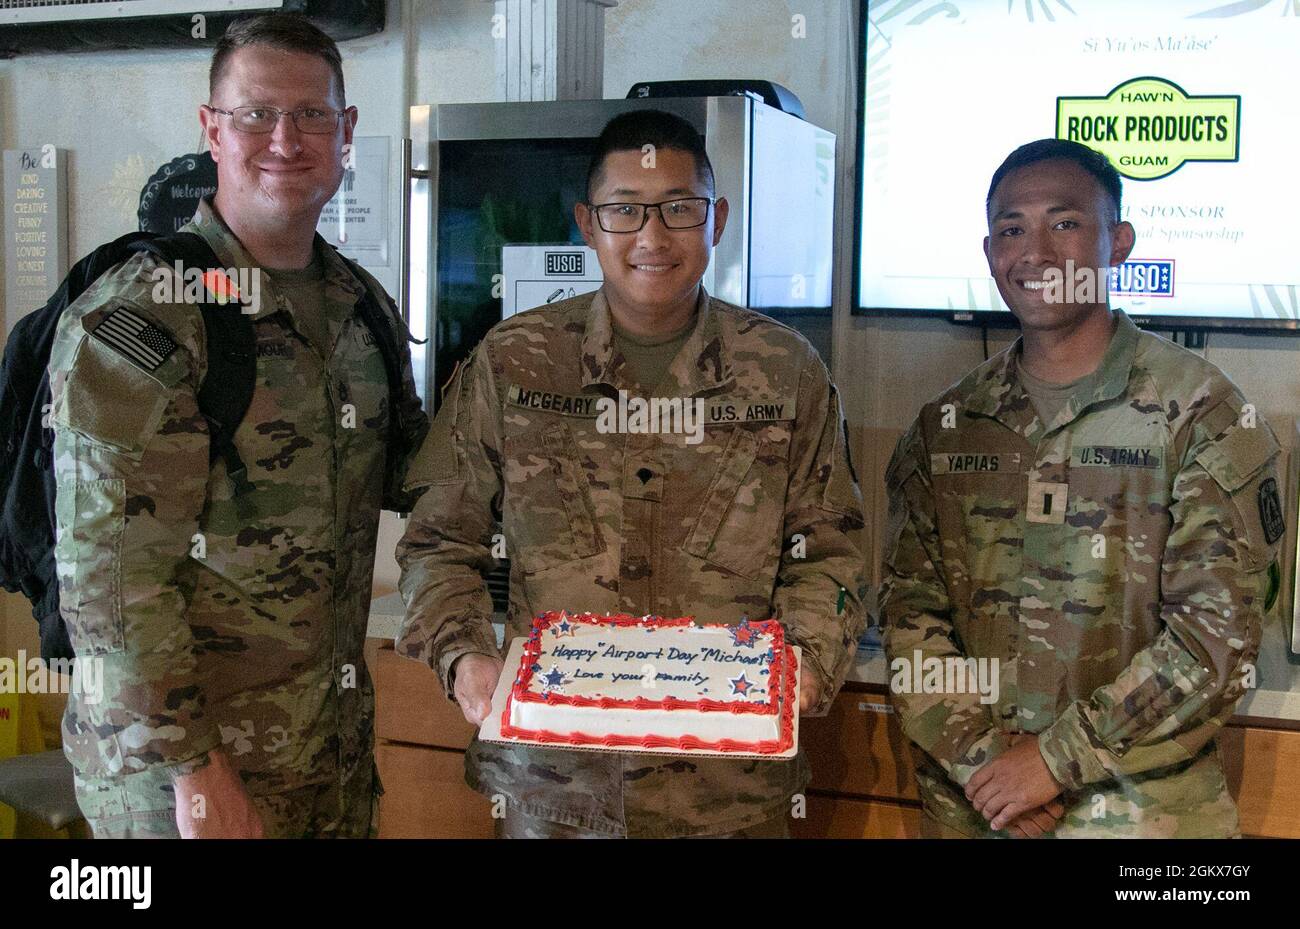 Spc. Michael McGeary, a satellite communication systems operator (MOS-25S) with the 11th Signal Brigade, center, celebrates the anniversary of his adoption with a cake sent from his parents, with his platoon sergeant and platoon leader, Staff Sgt. Brian Seymour, a nodal network systems operator, left, and 1st Lt. Ruben Yapias, a signal officer, right, during Forager 21, at Andersen Air Force Base, Guam, July 16, 2021. McGeary grew up in Michigan and was adopted by his parents from South Korea. Stock Photo